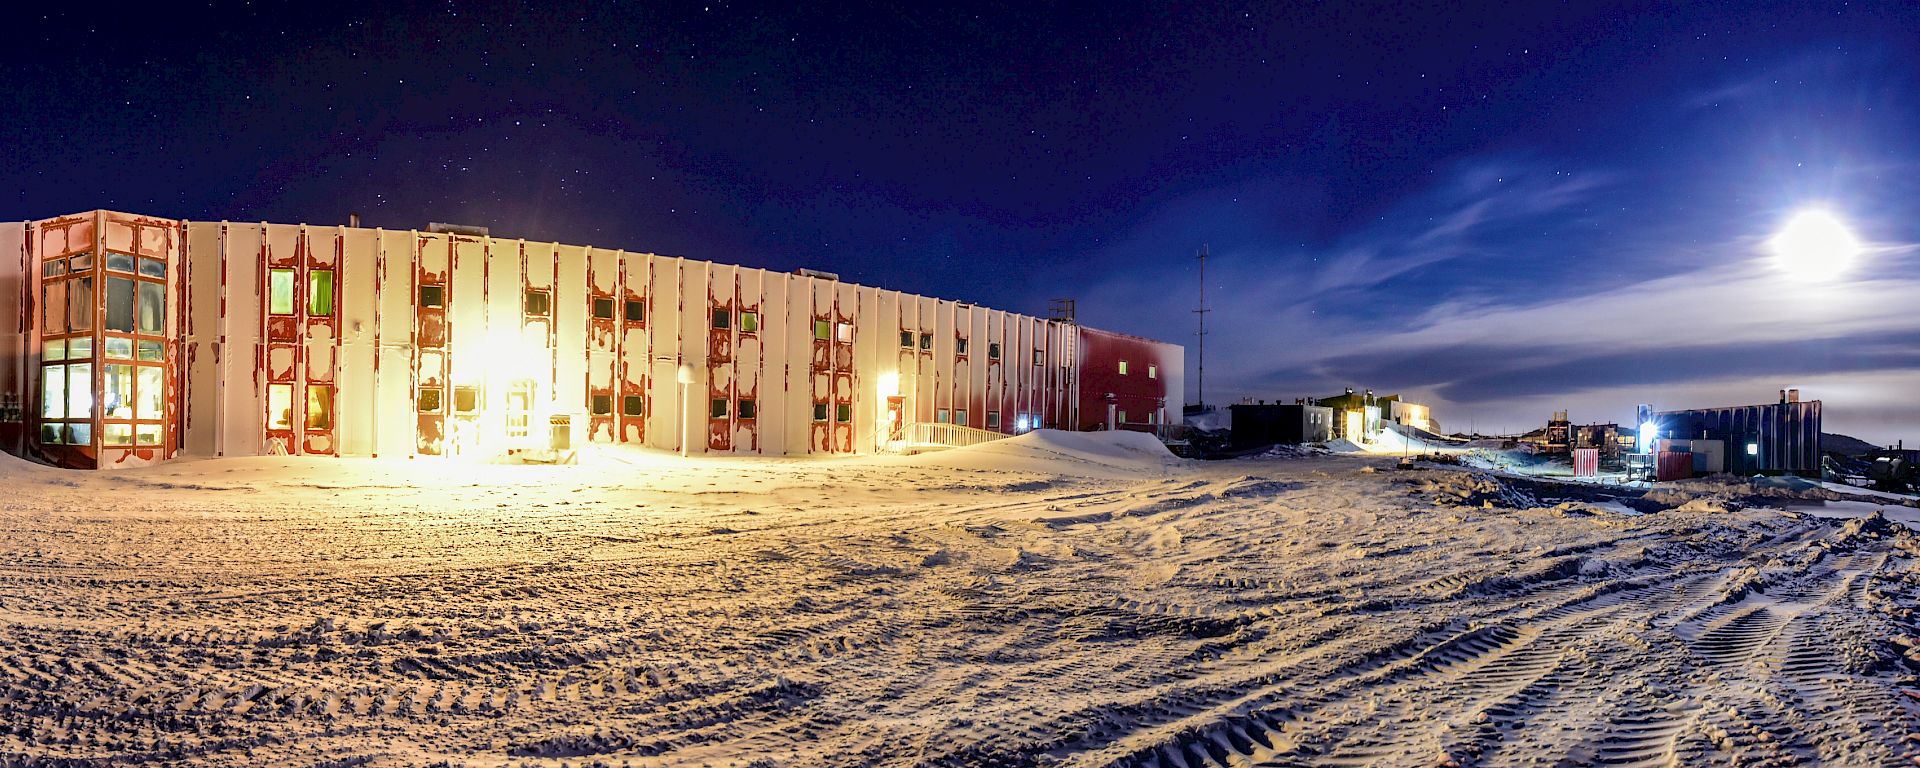 Panorama of Casey living quarters at night.